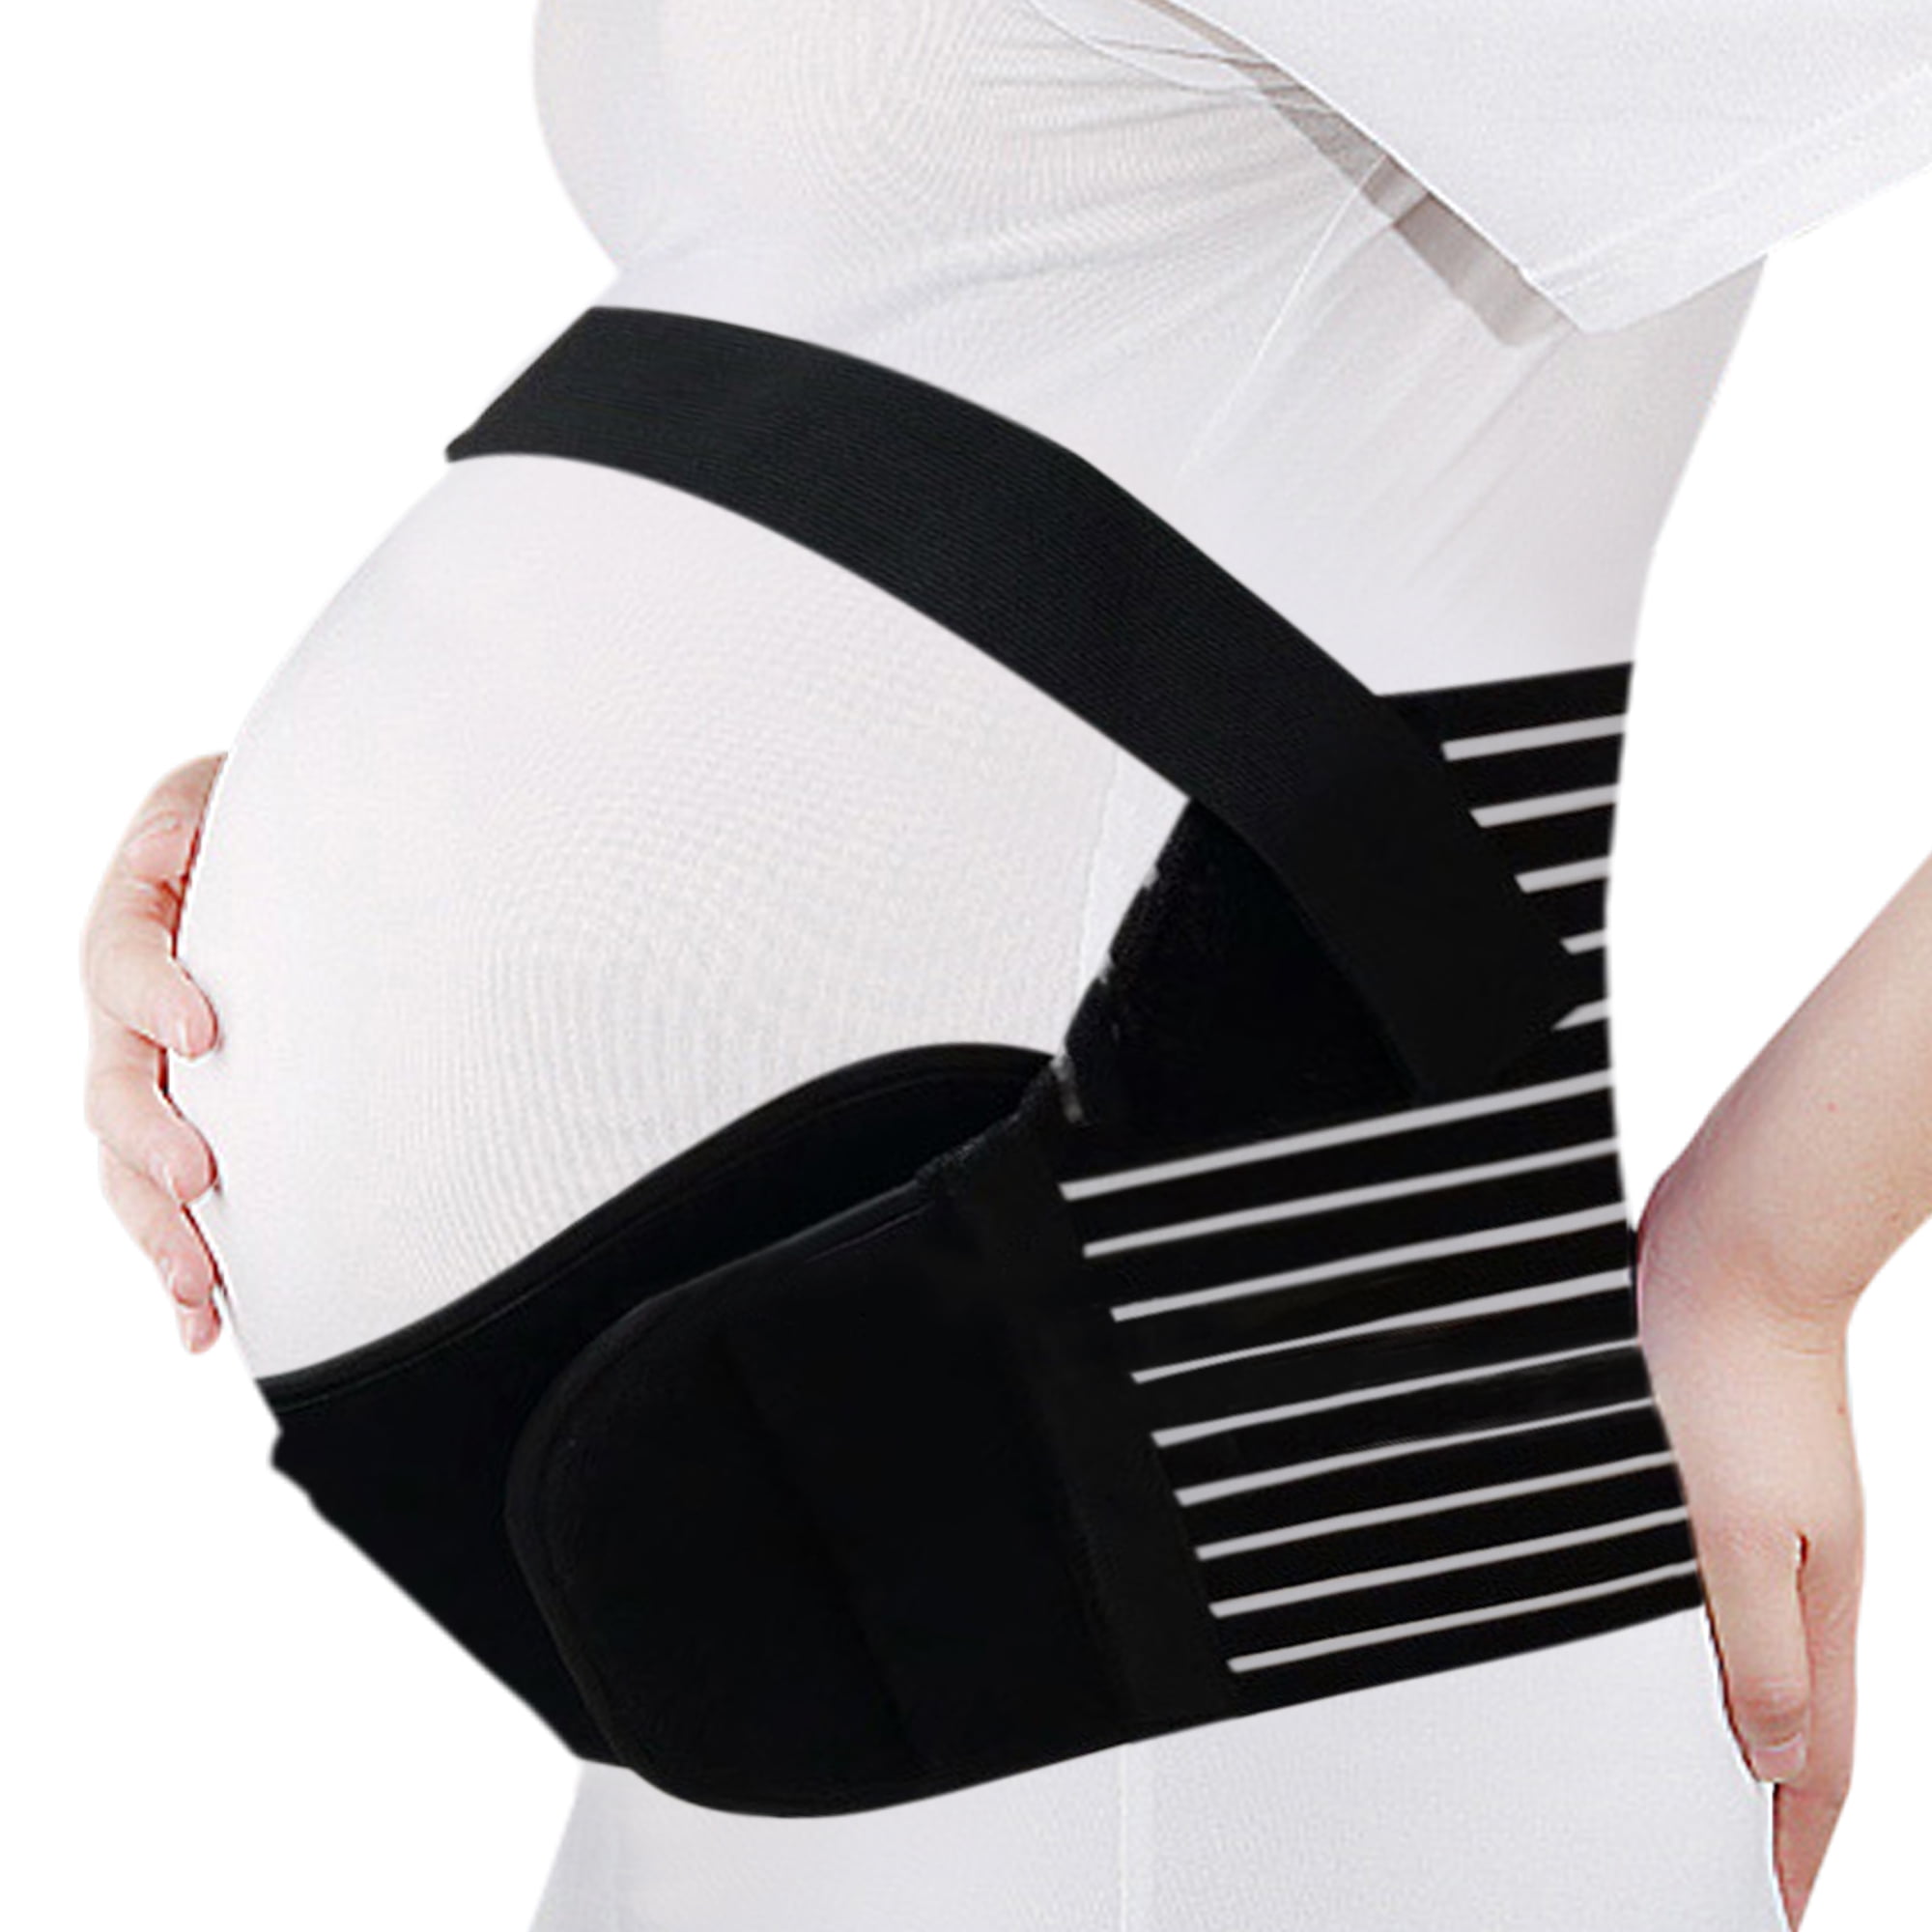 Maternity Belts Waist Care Tools Abdomen Support Belly Band Back Brace Protector 